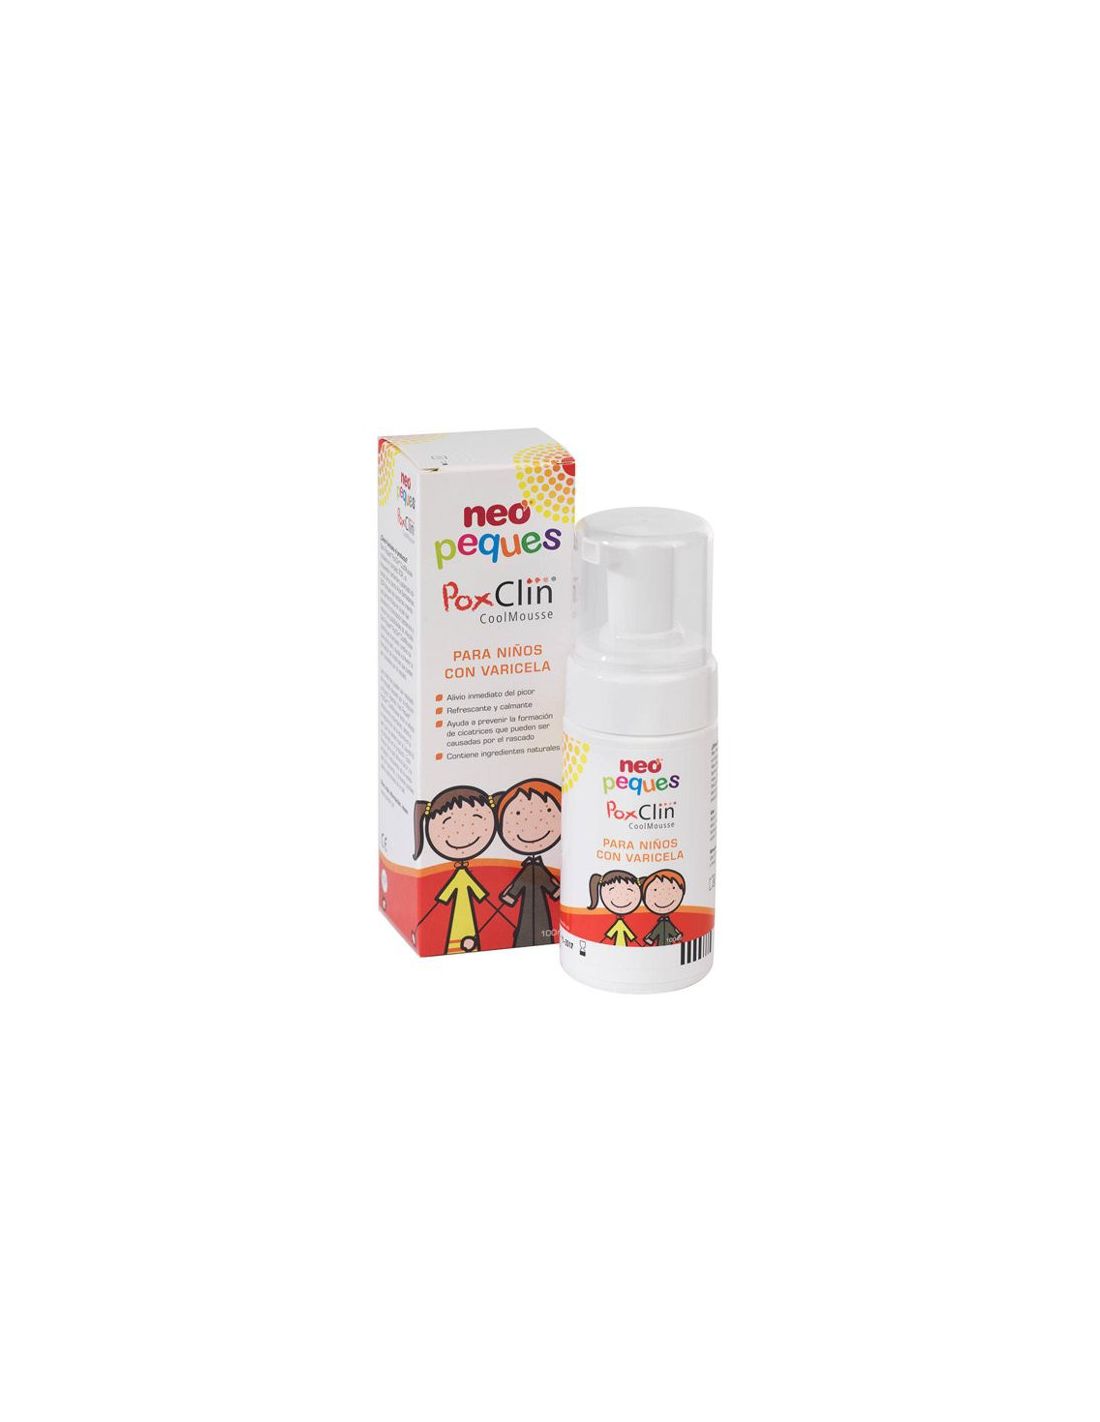 Neo Peques PoxClin - 100 ml.